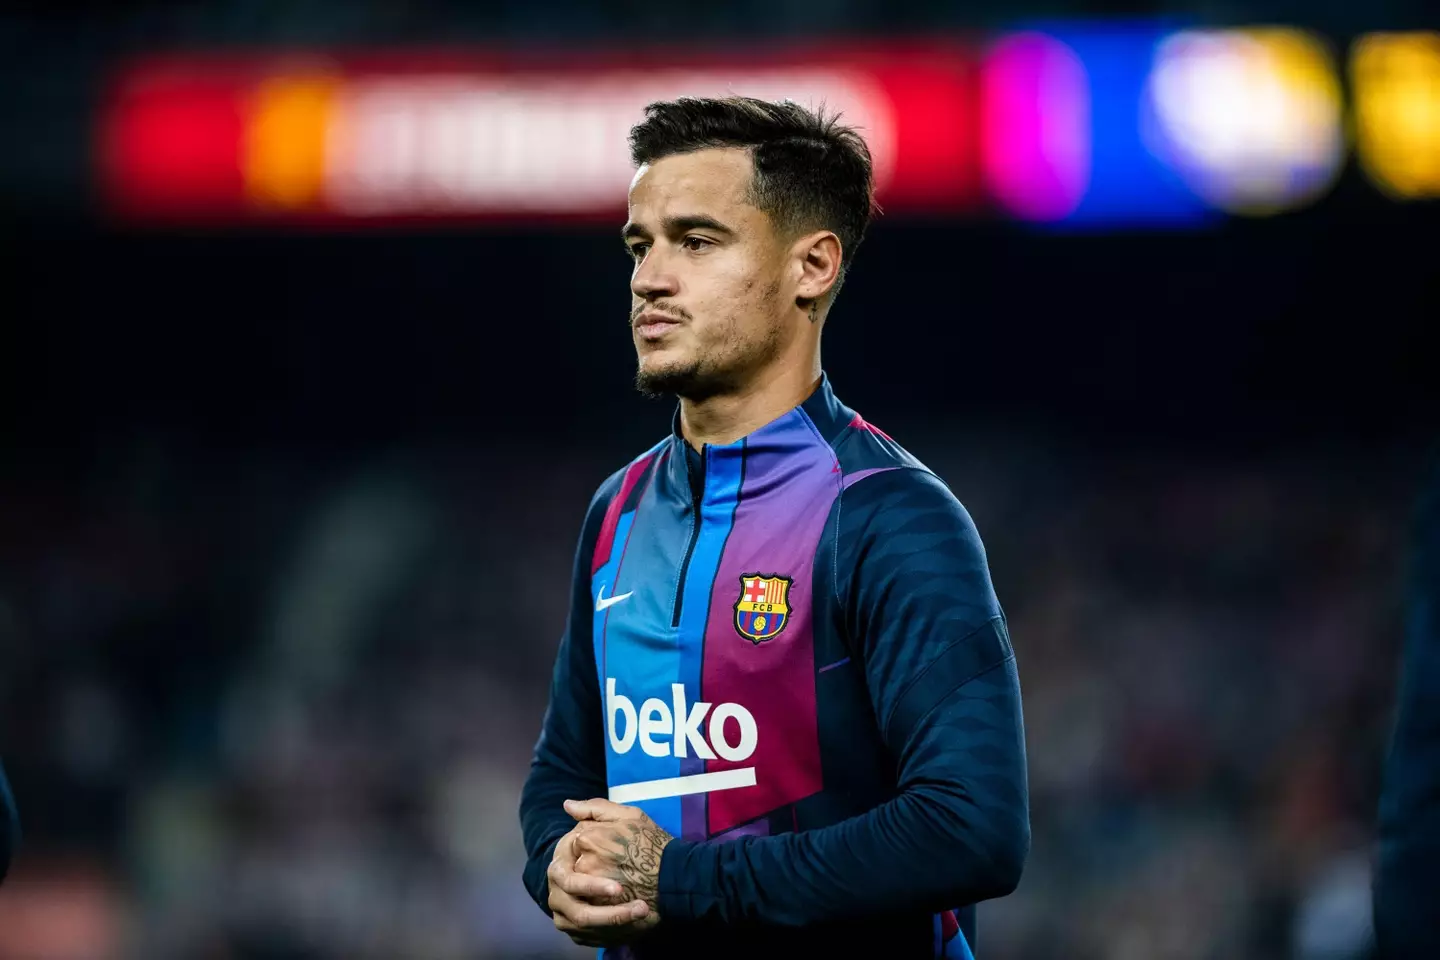 Coutinho failed to live up to expectations at Barcelona